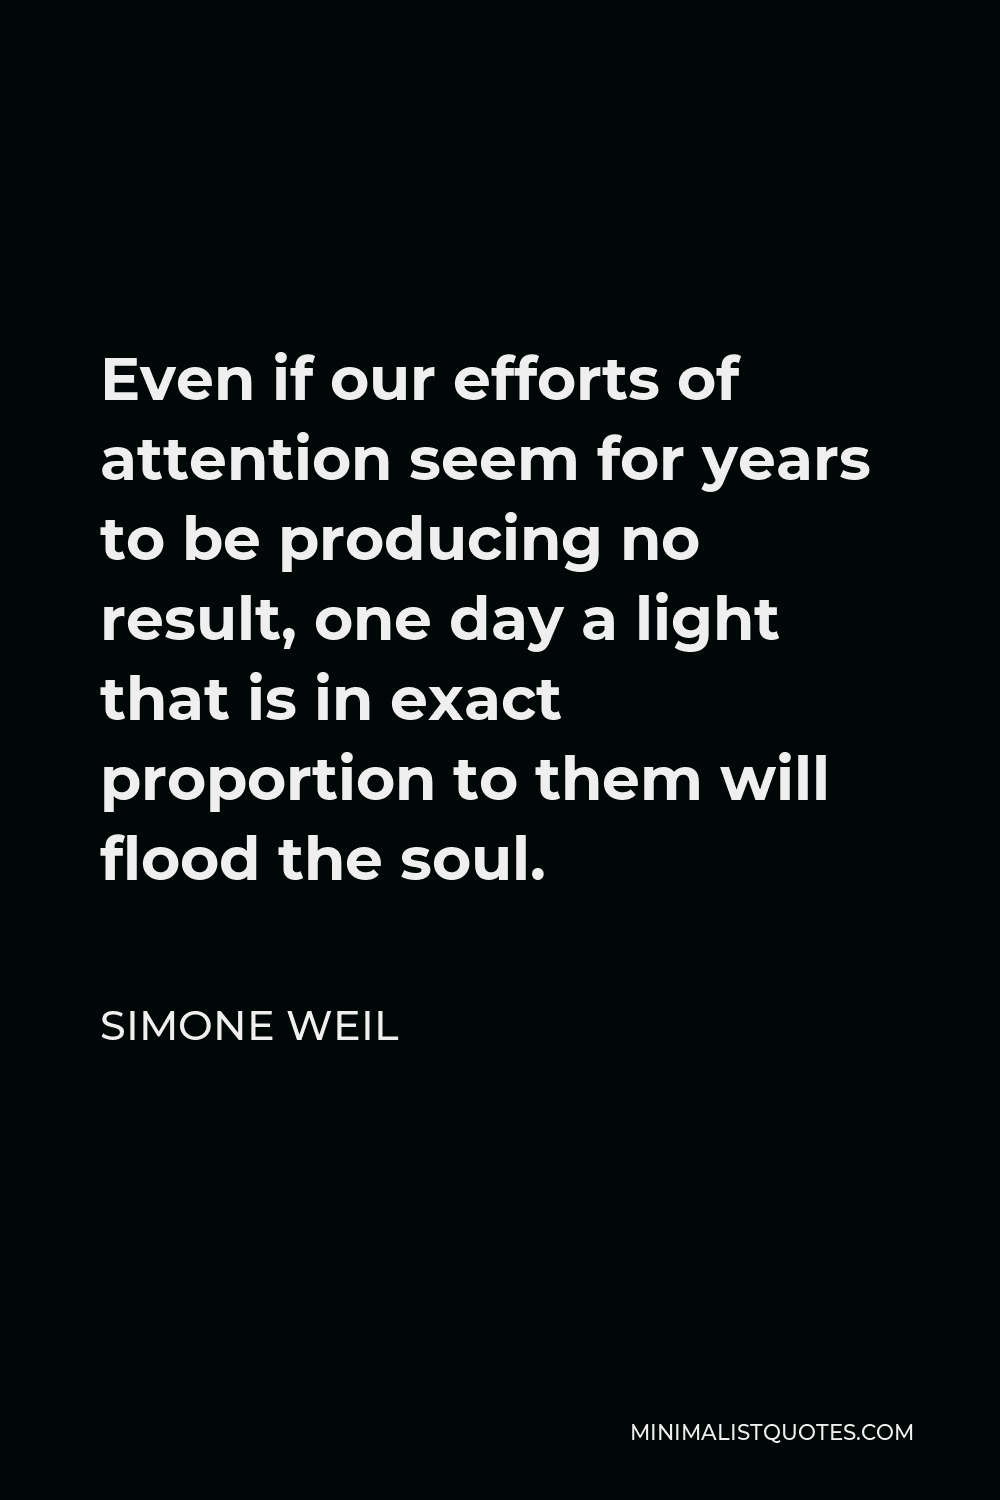 Simone Weil quote: Expectant waiting is the foundation of the